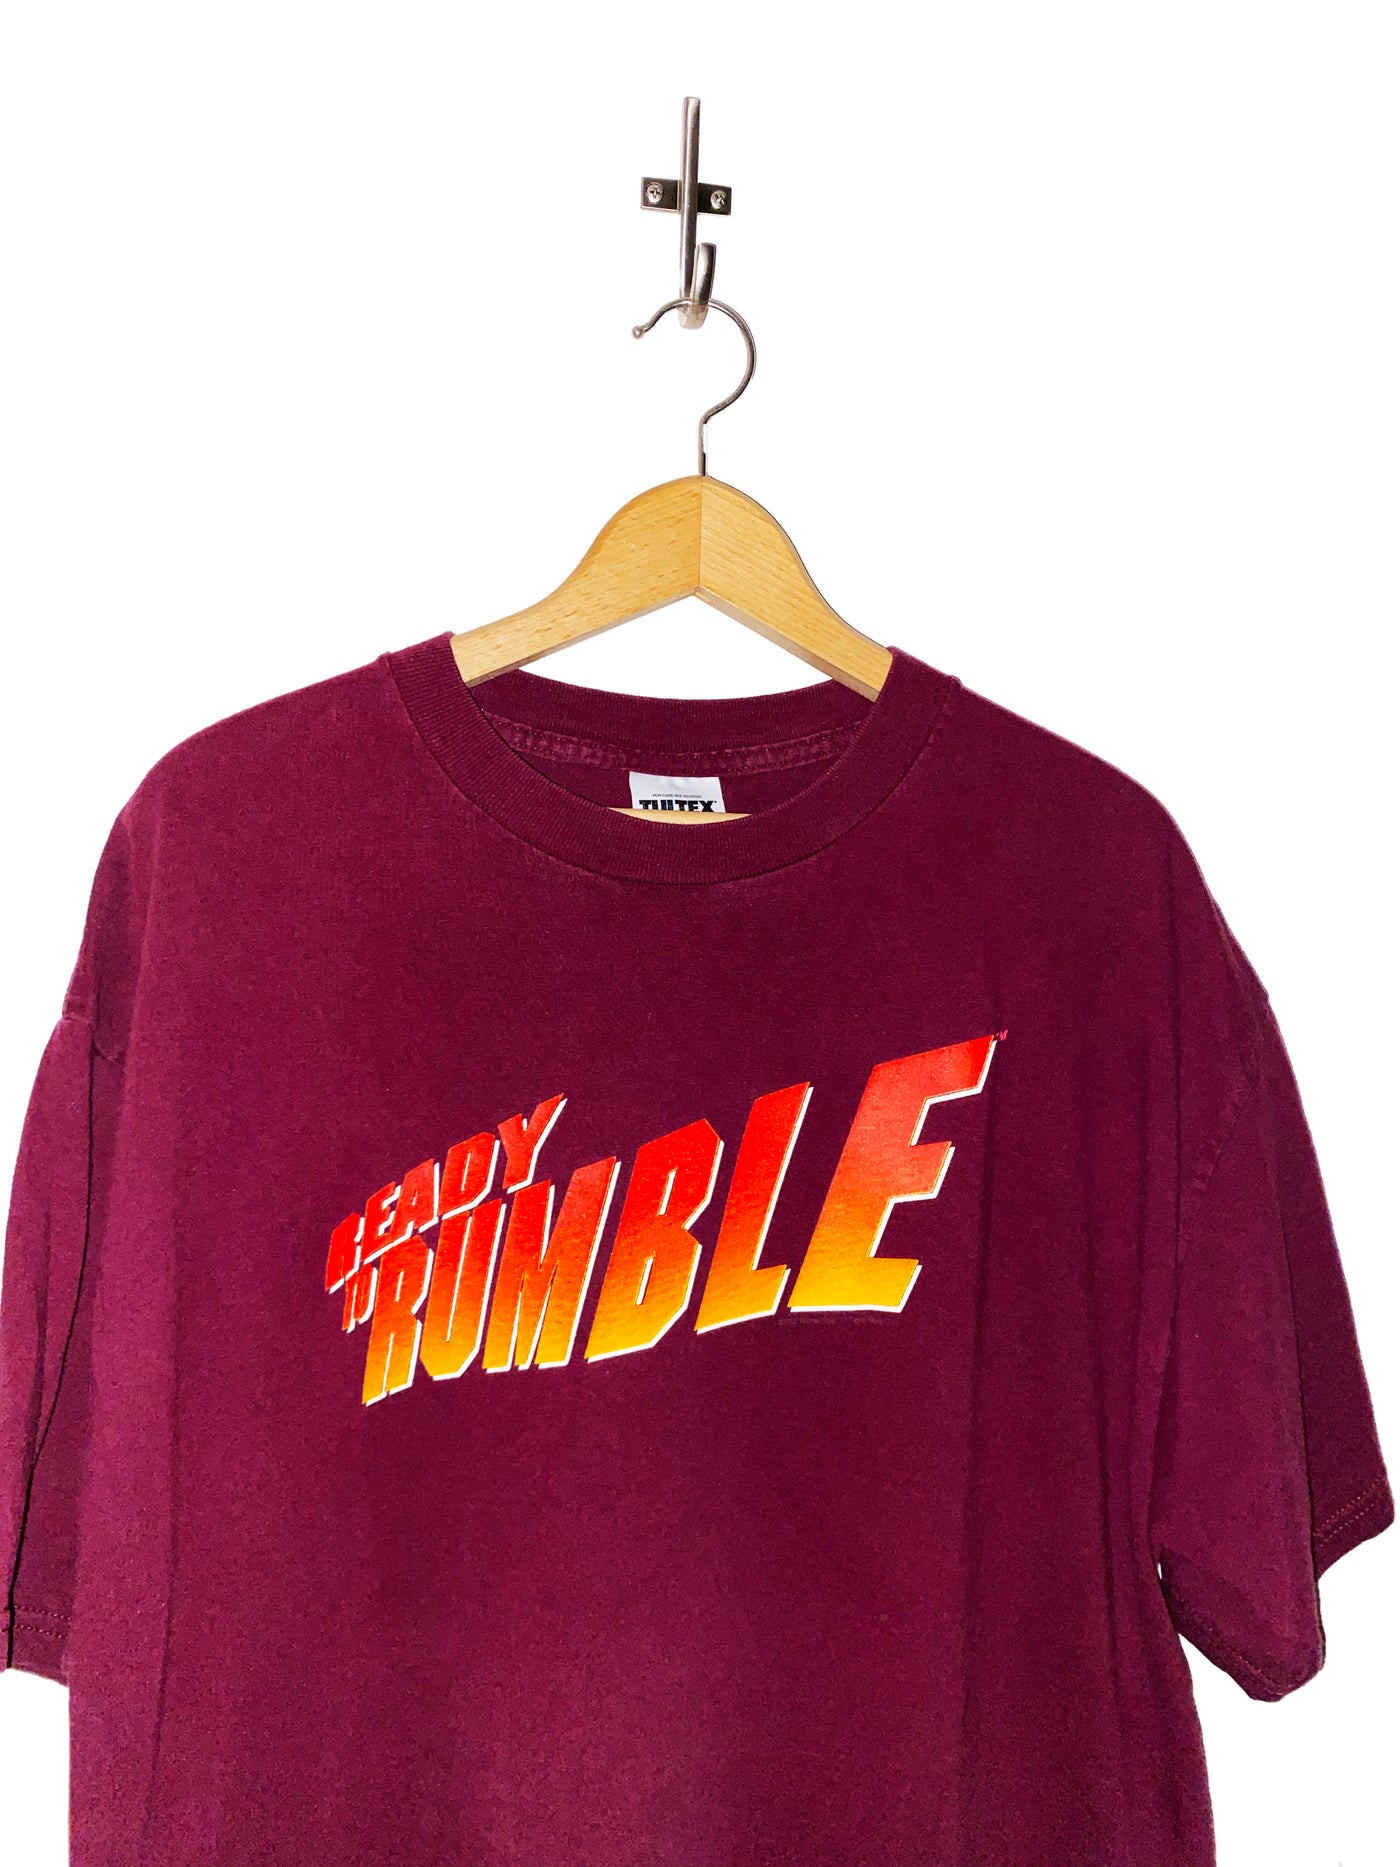 Vintage ‘Ready to Rumble’ Promo T-Shirt